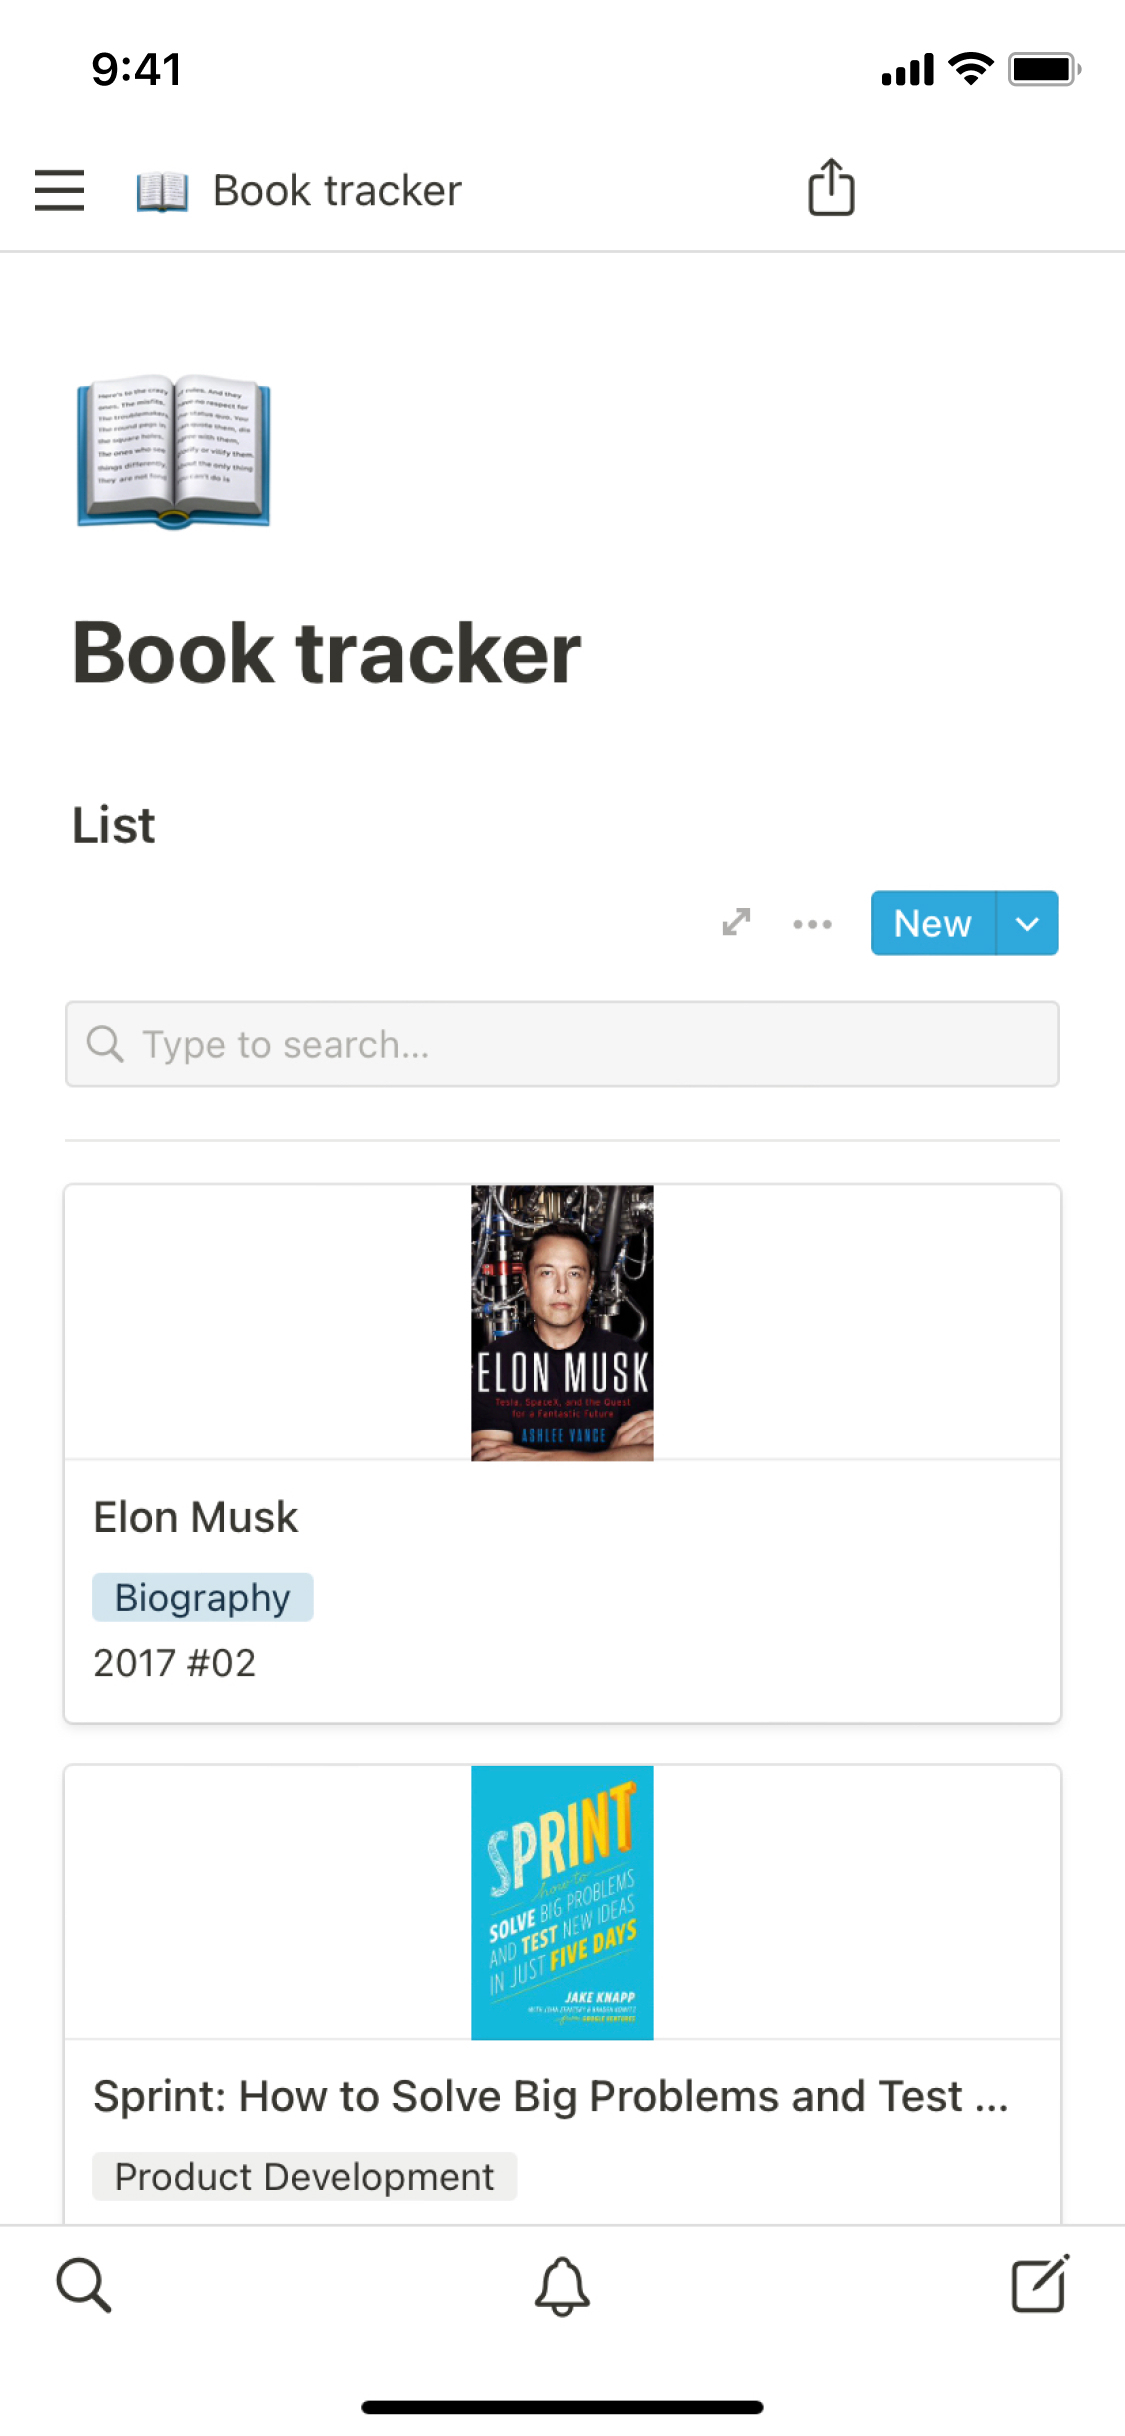 The mobile image for the Book tracker template